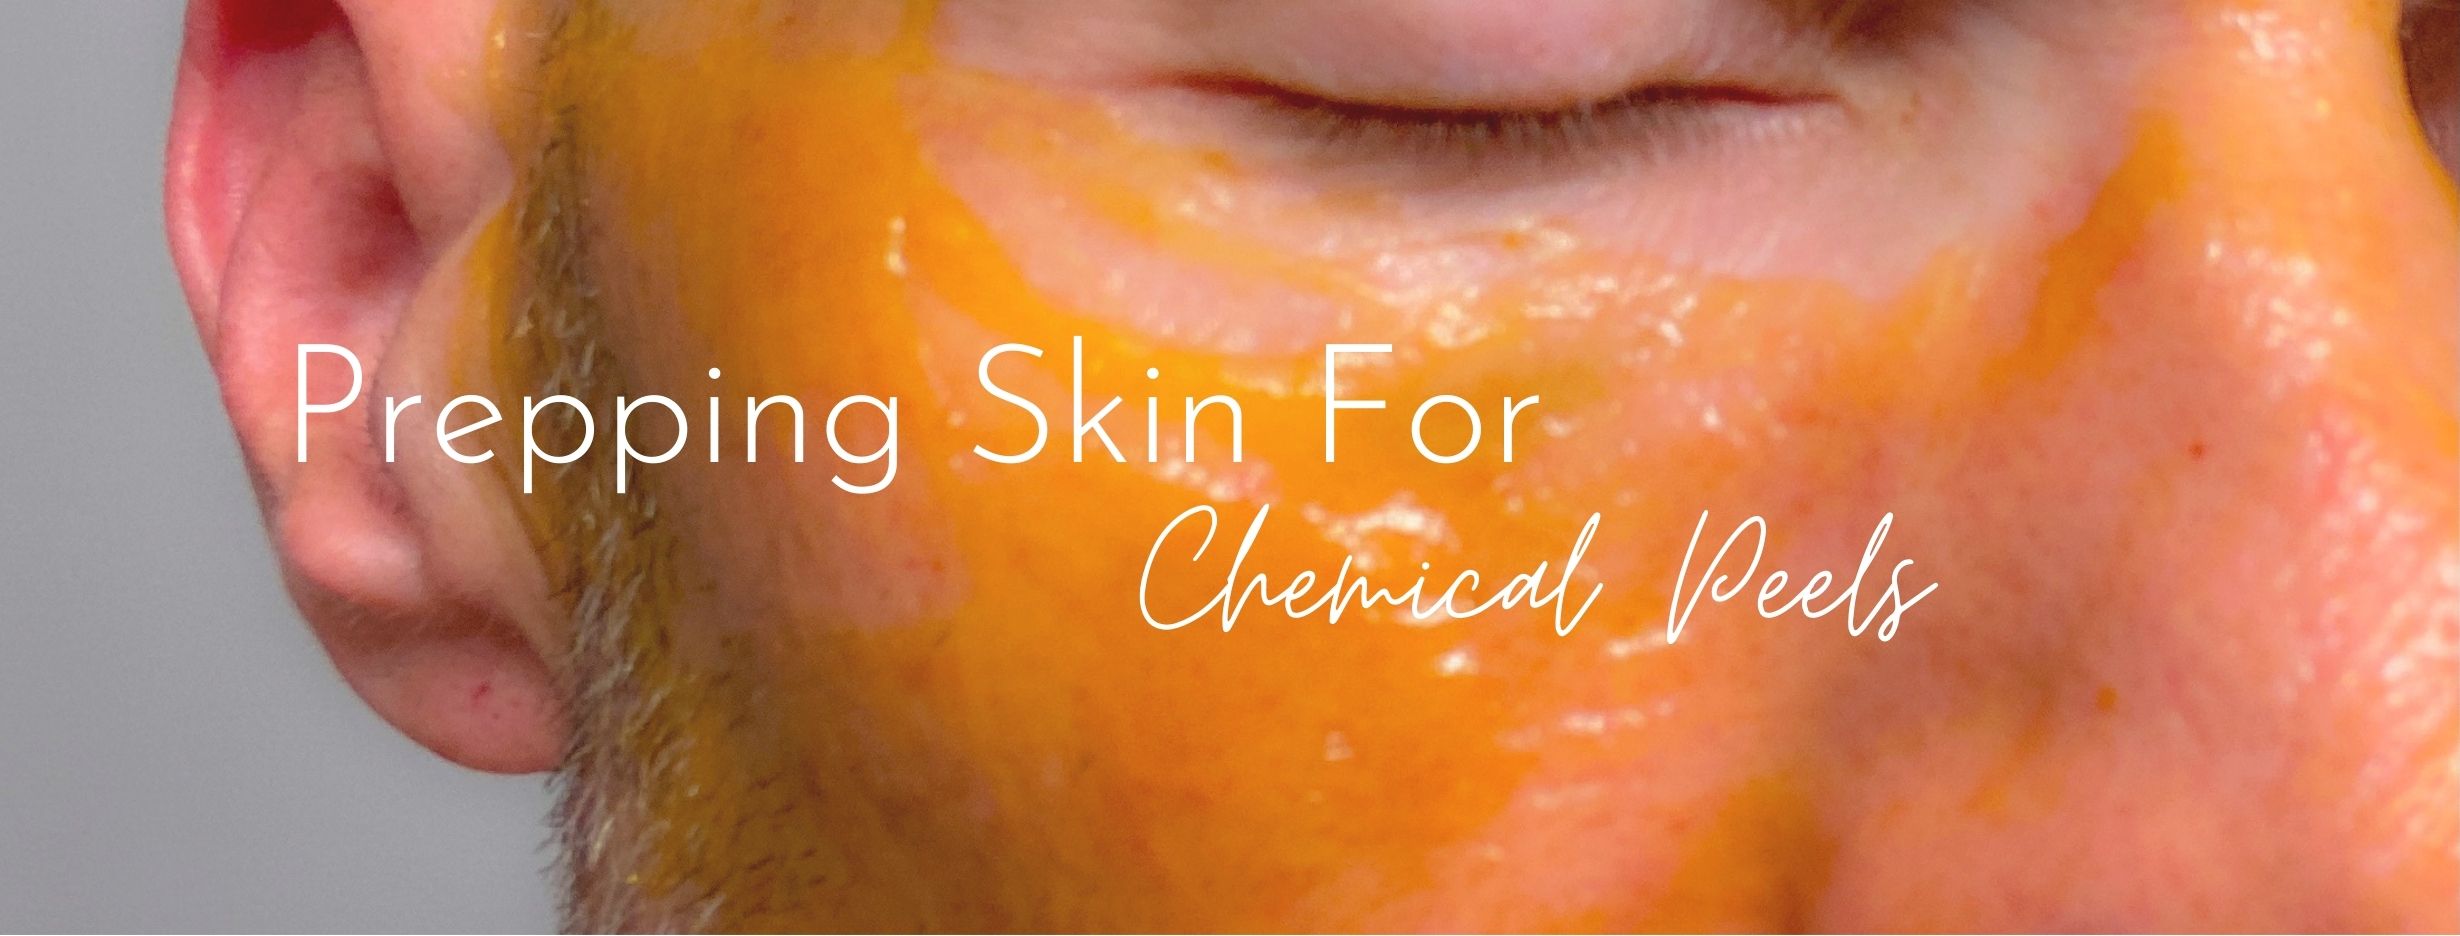 Professional + Home Care To Prep The Skin For Deep Peels